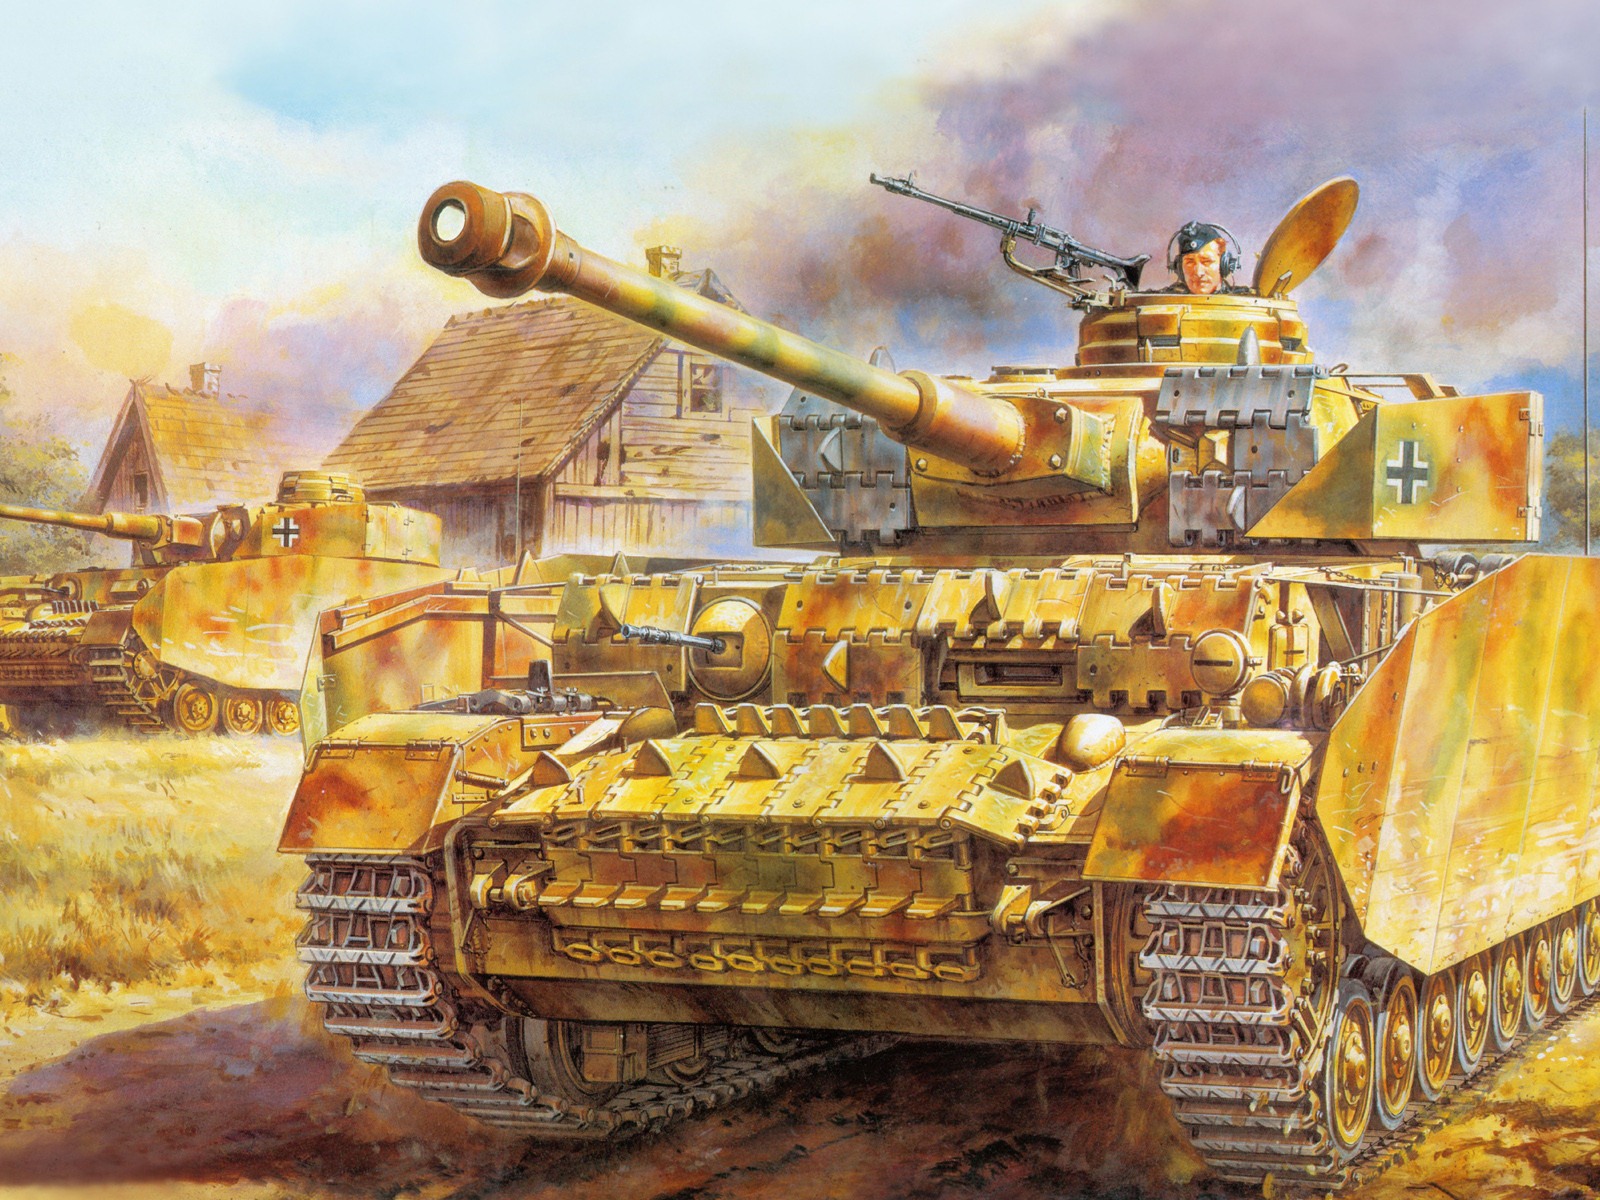 Military tanks, armored HD painting wallpapers #13 - 1600x1200